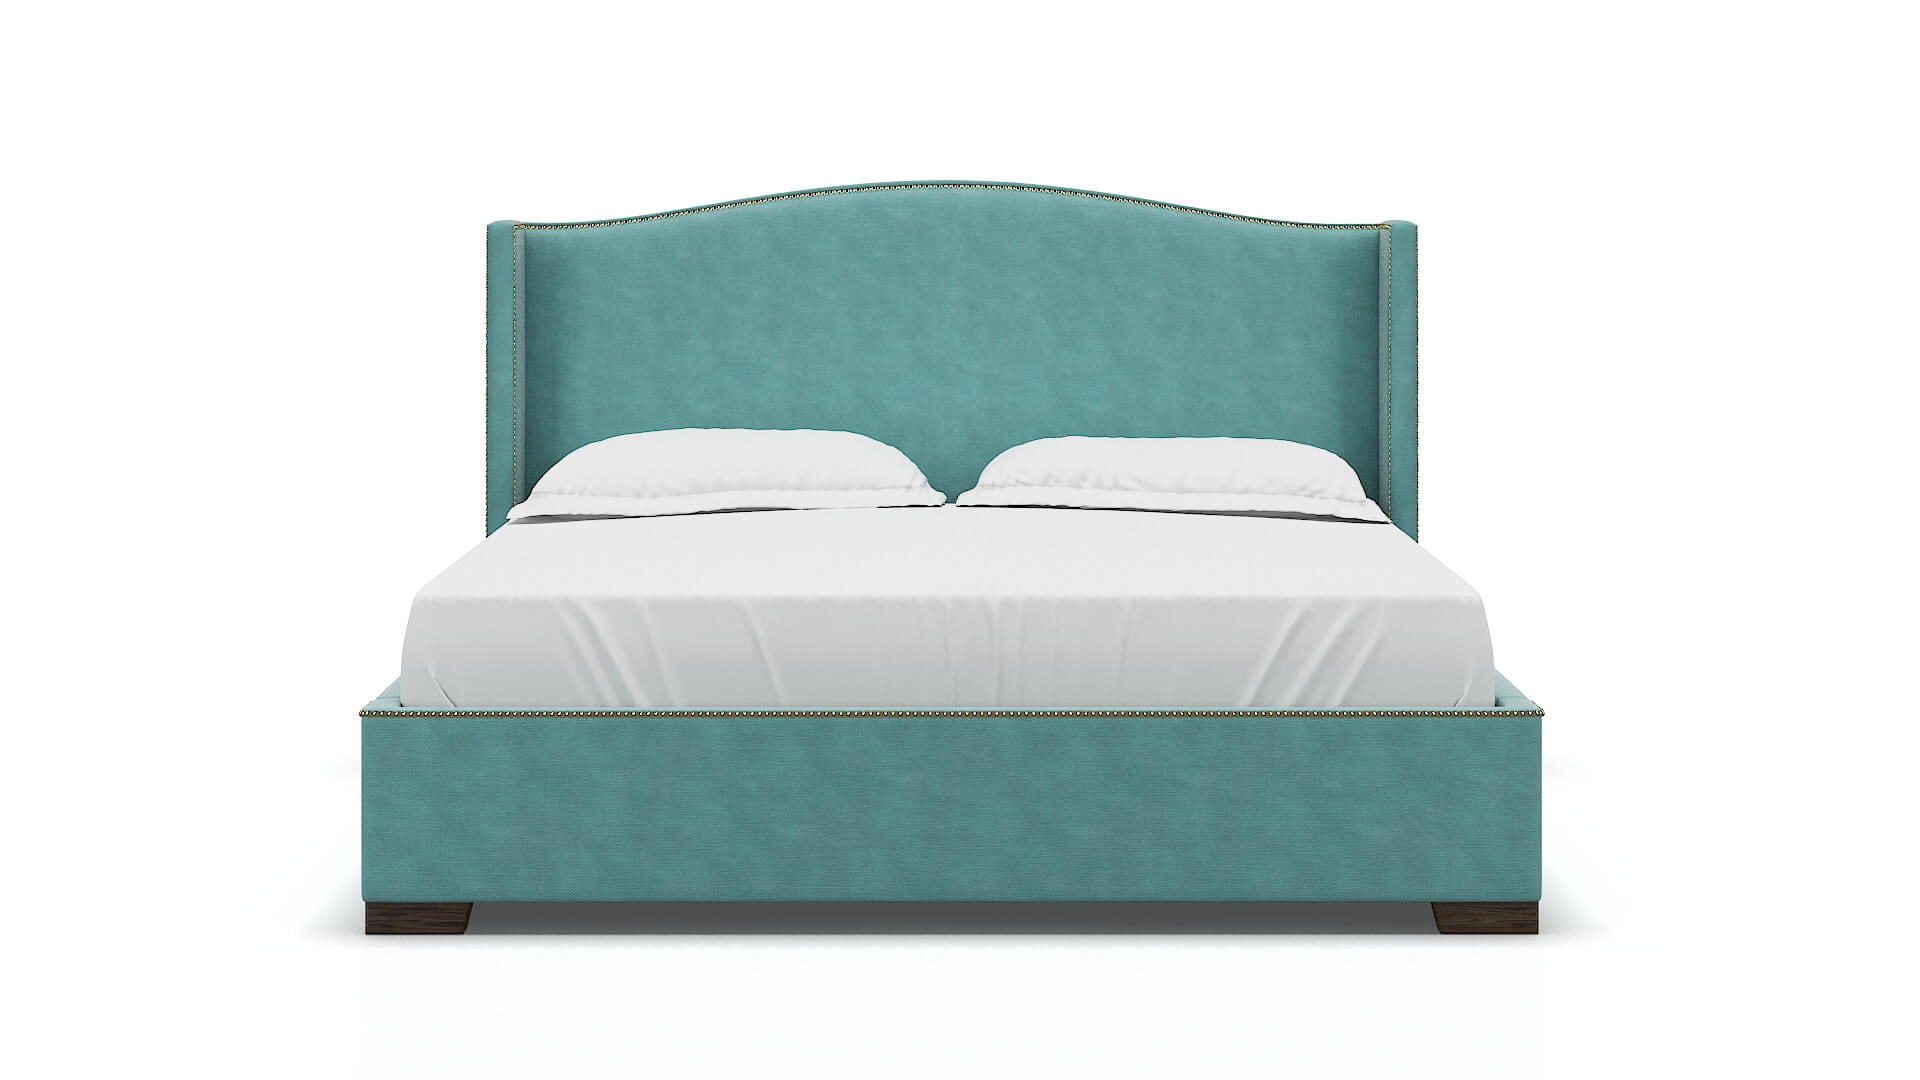 Maya Curious Turquoise Bed King espresso legs 1